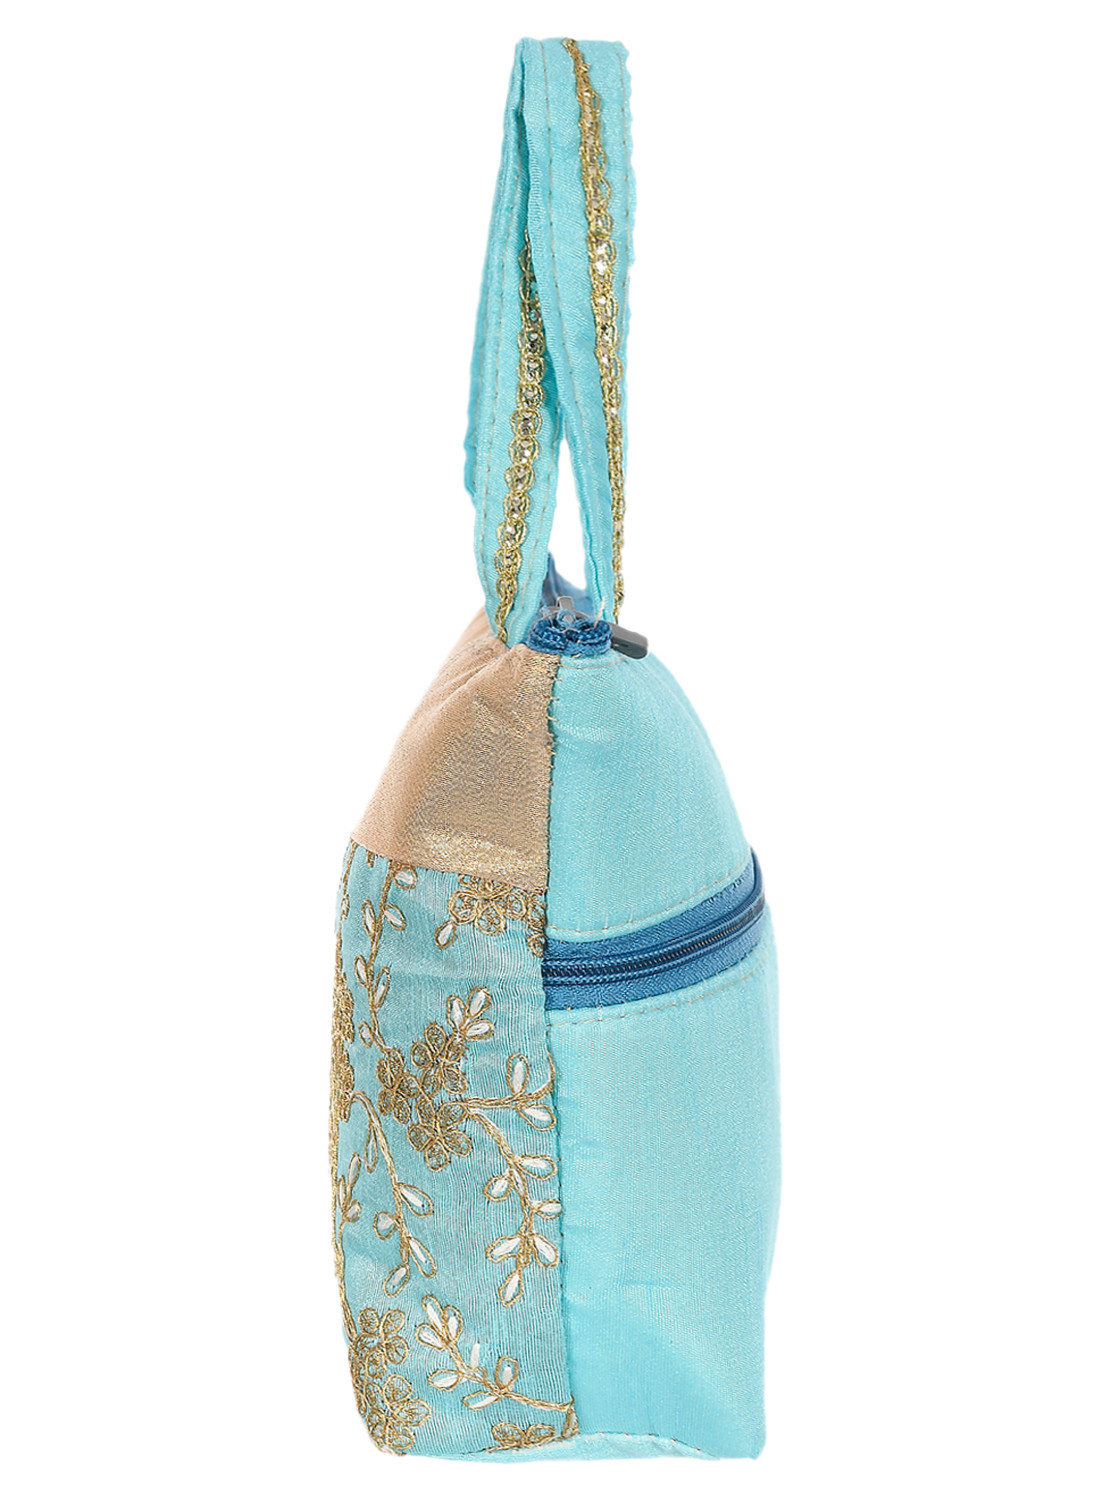 Kuber Industries Polyester Embroidery Design Hand Bag For Women/Girls With Handle (Sky Blue) 54KM4038